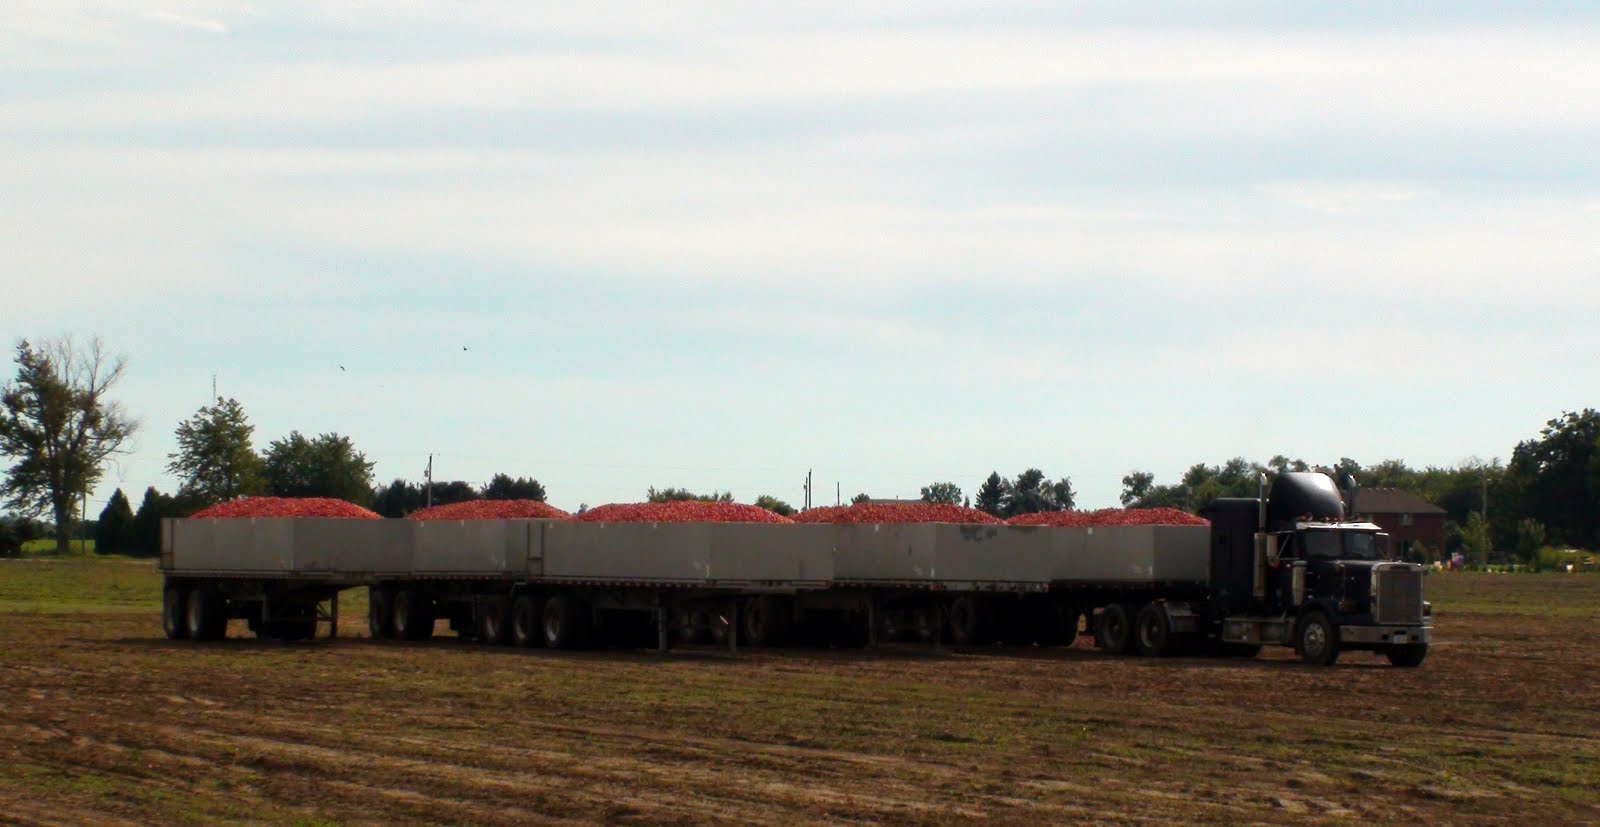 A truck hauling tomatoes to the plant.